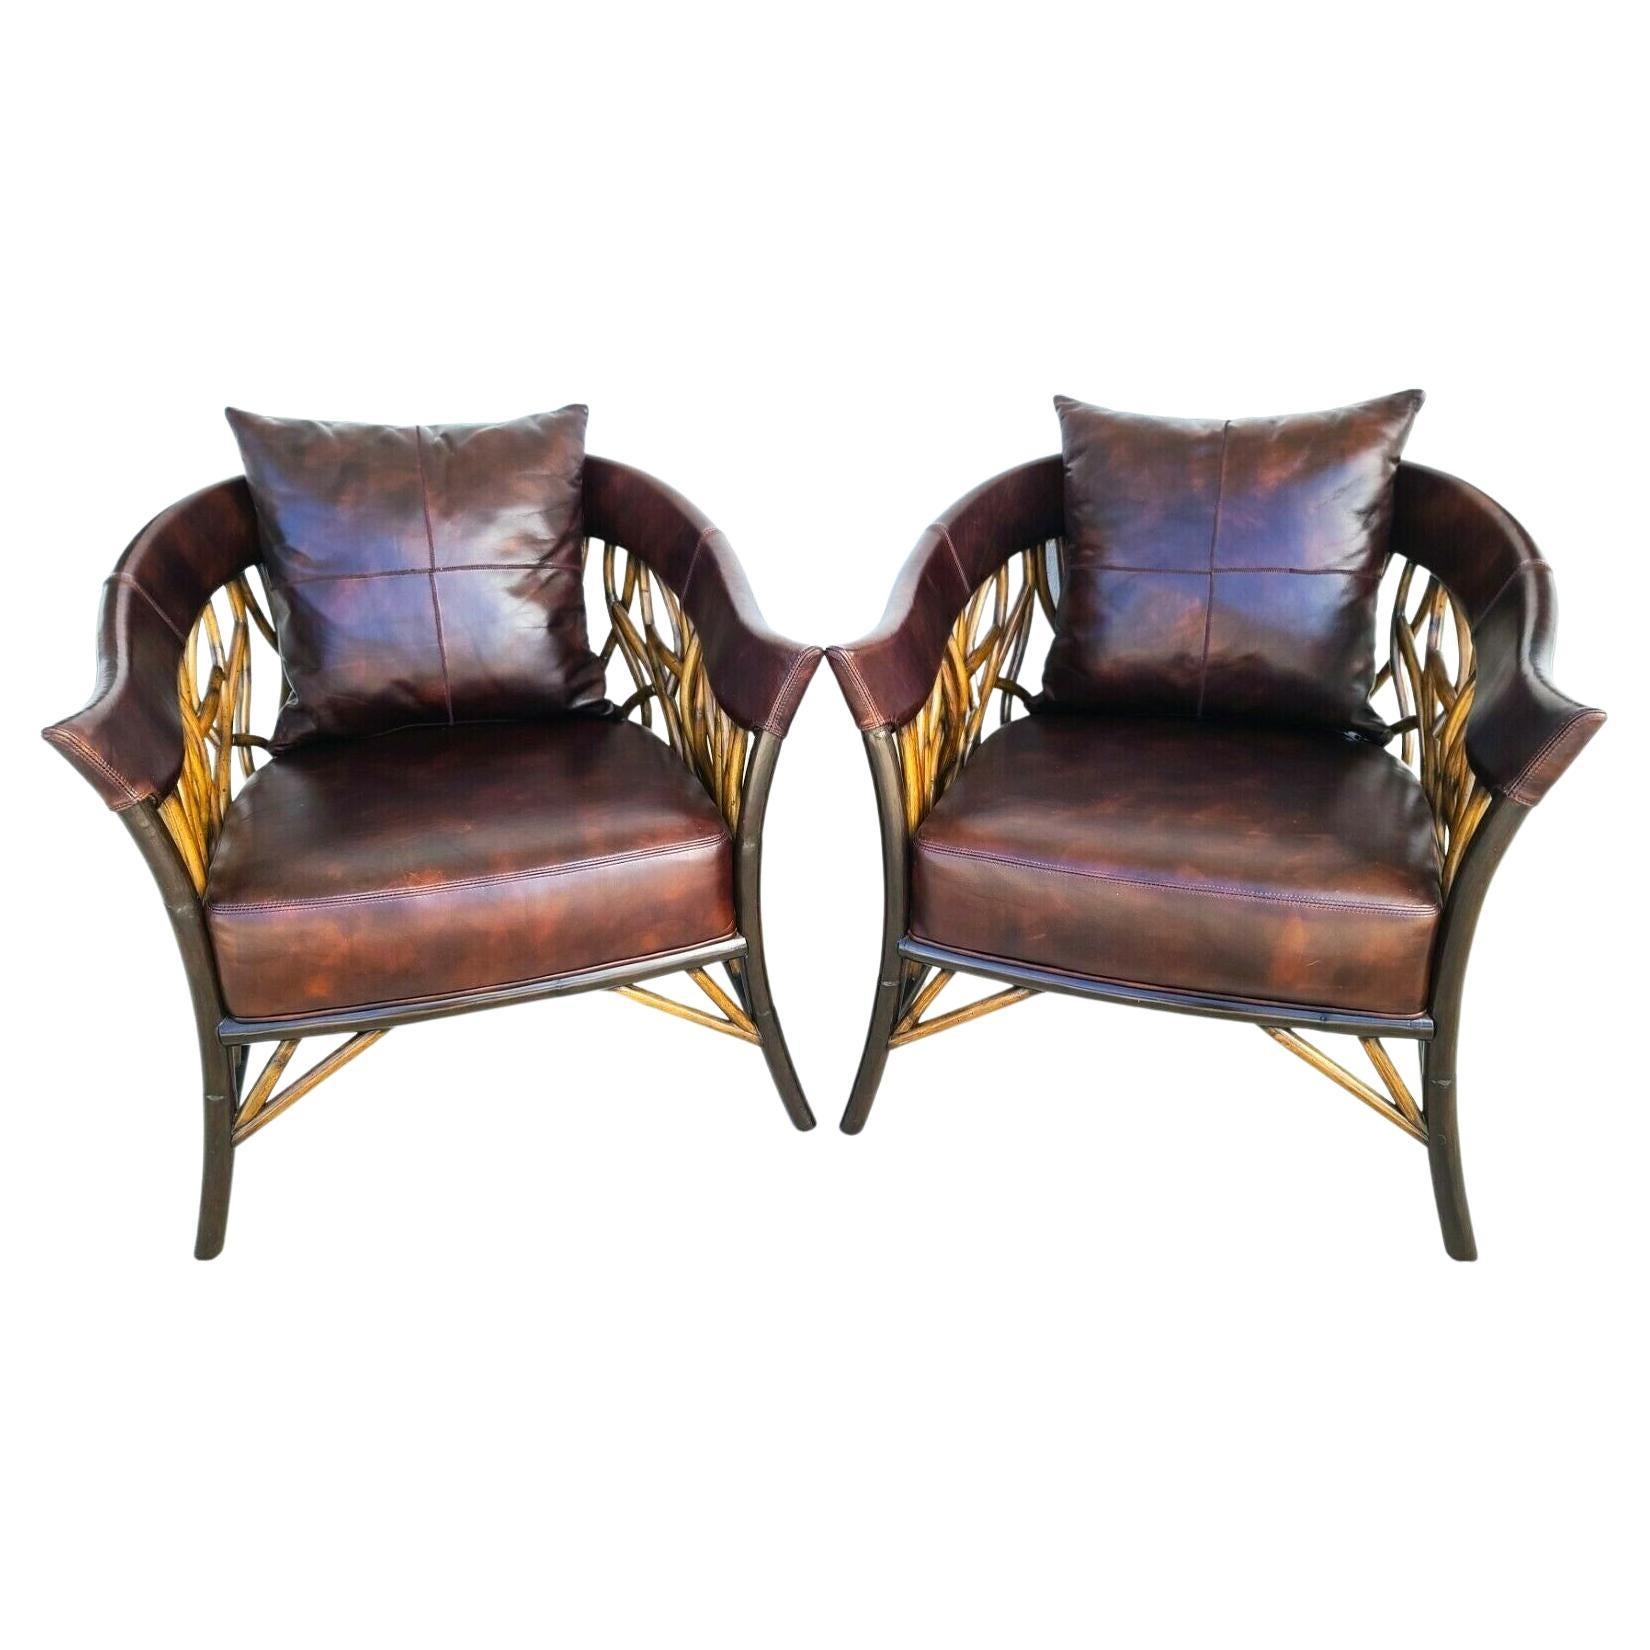 For FULL item description be sure to click on CONTINUE READING at the bottom of this listing.

Offering One Of Our Recent Palm Beach Estate Fine Furniture Acquisitions Of A Pair of Organic Modern Bamboo & Leather Club Chairs by PALECEK
Come with